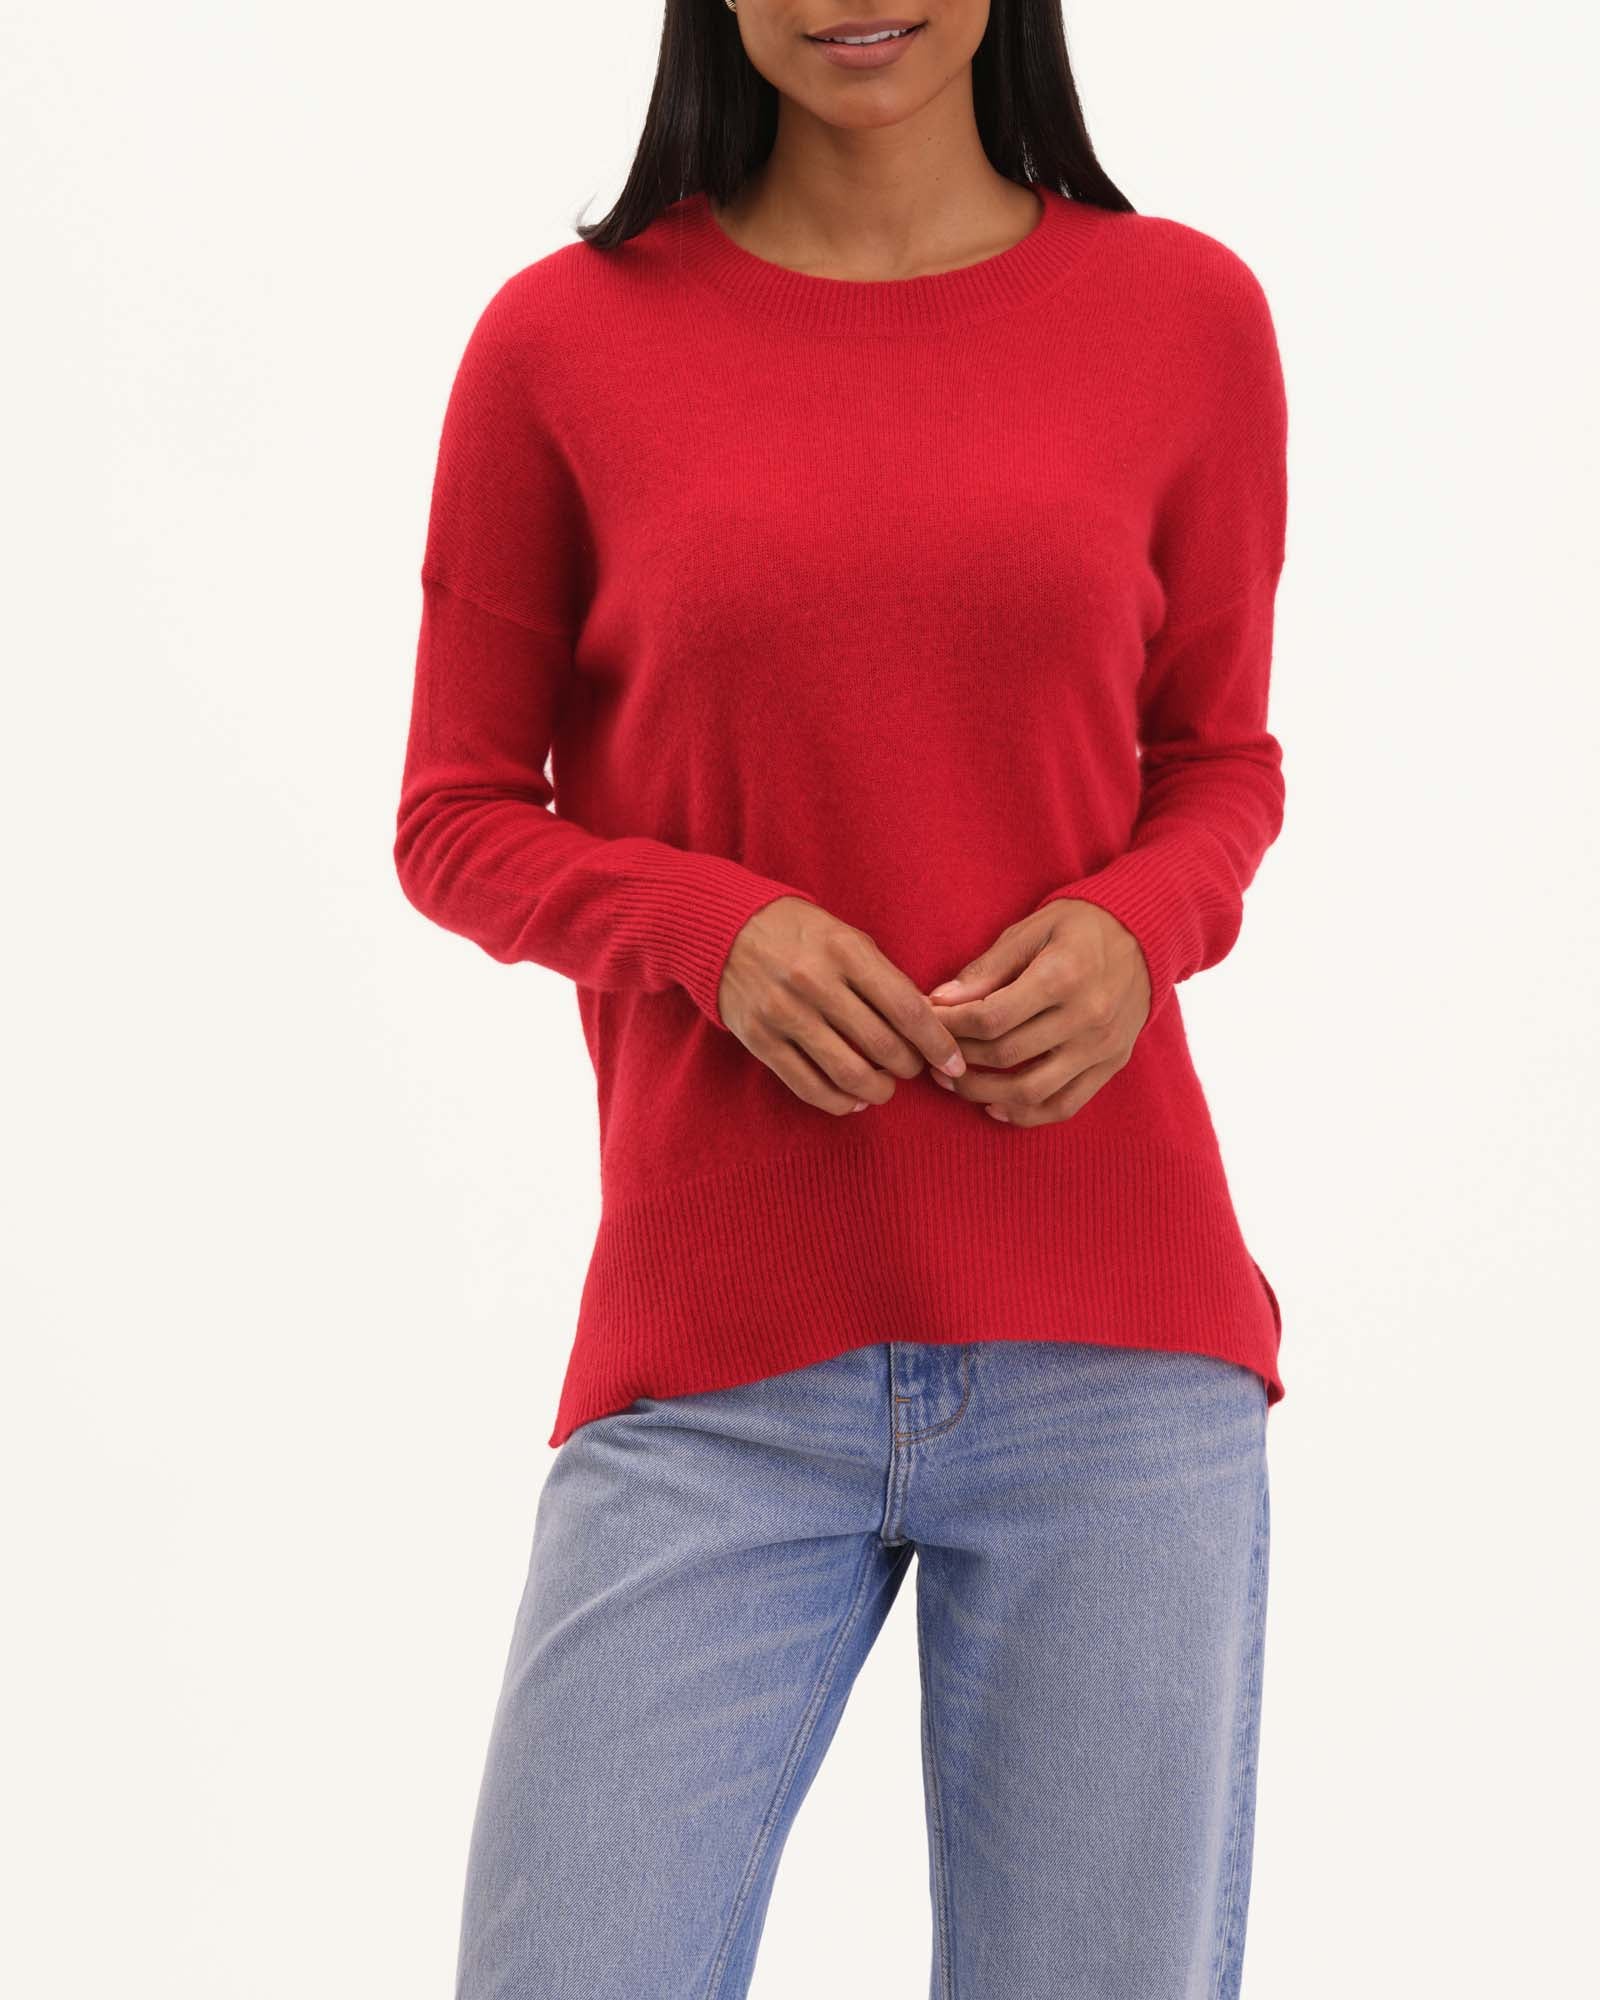 Our Classic Lightweight Cashmere Sweater